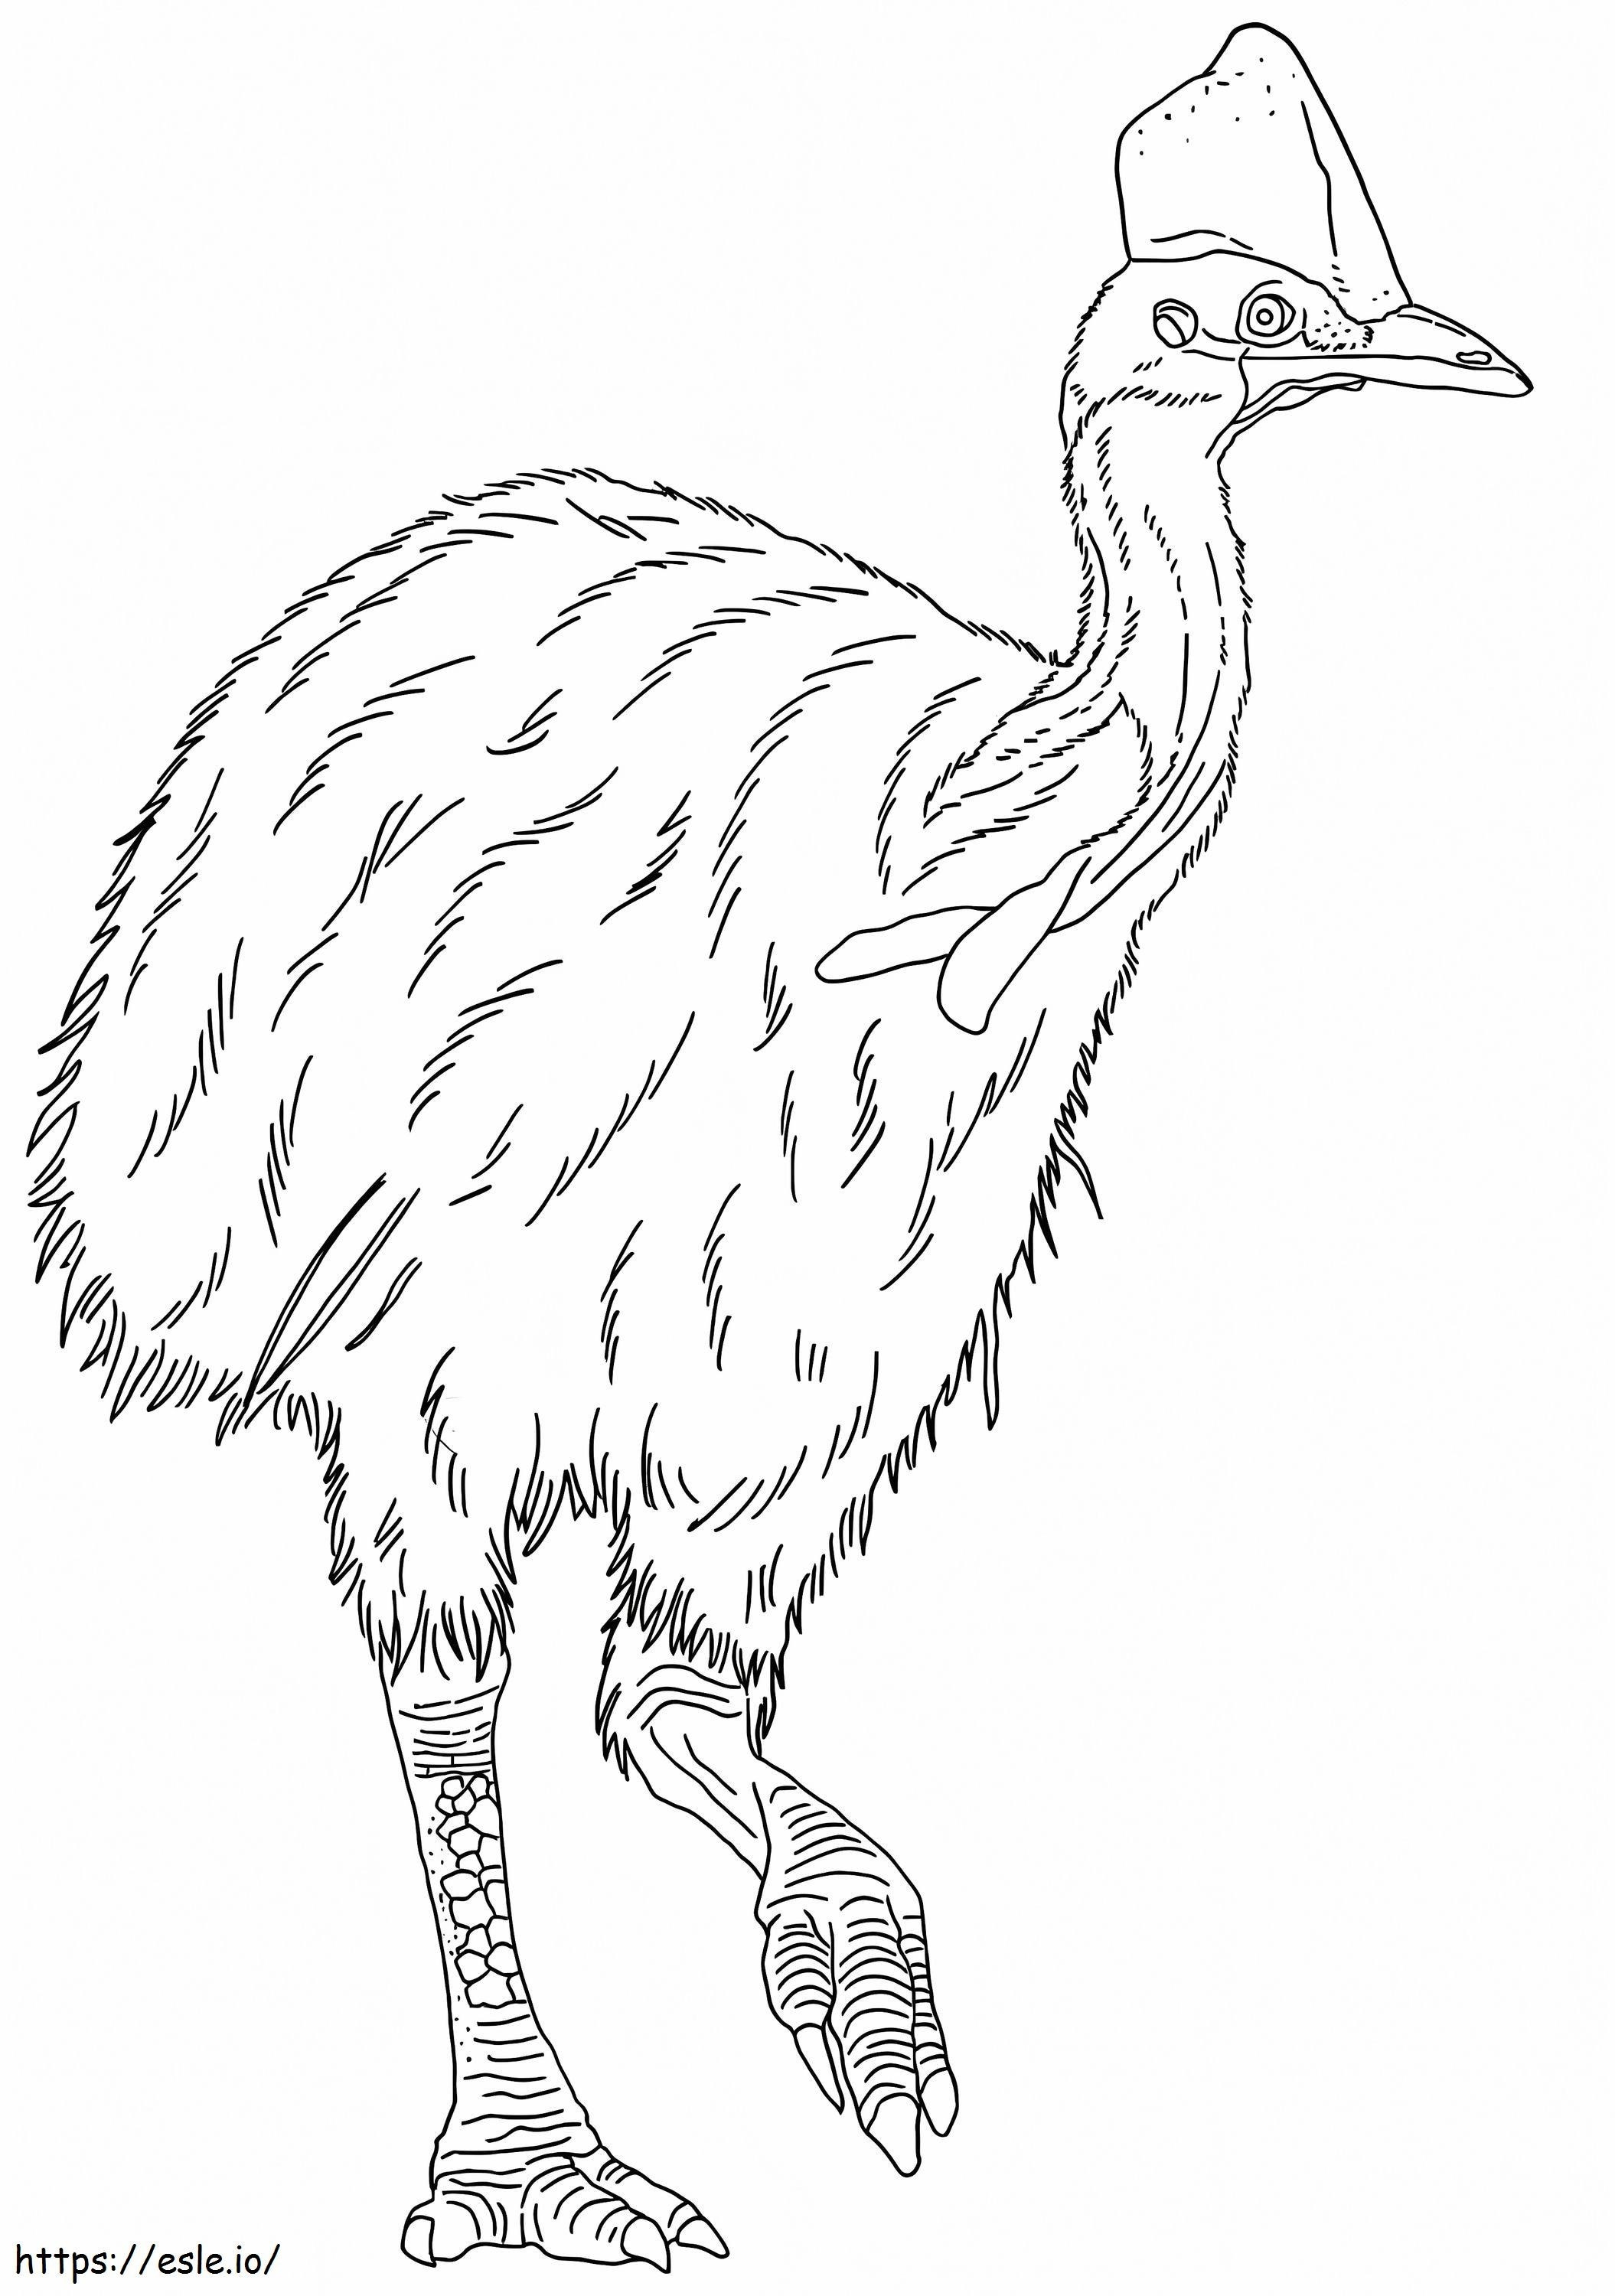 Cassowary 4 coloring page